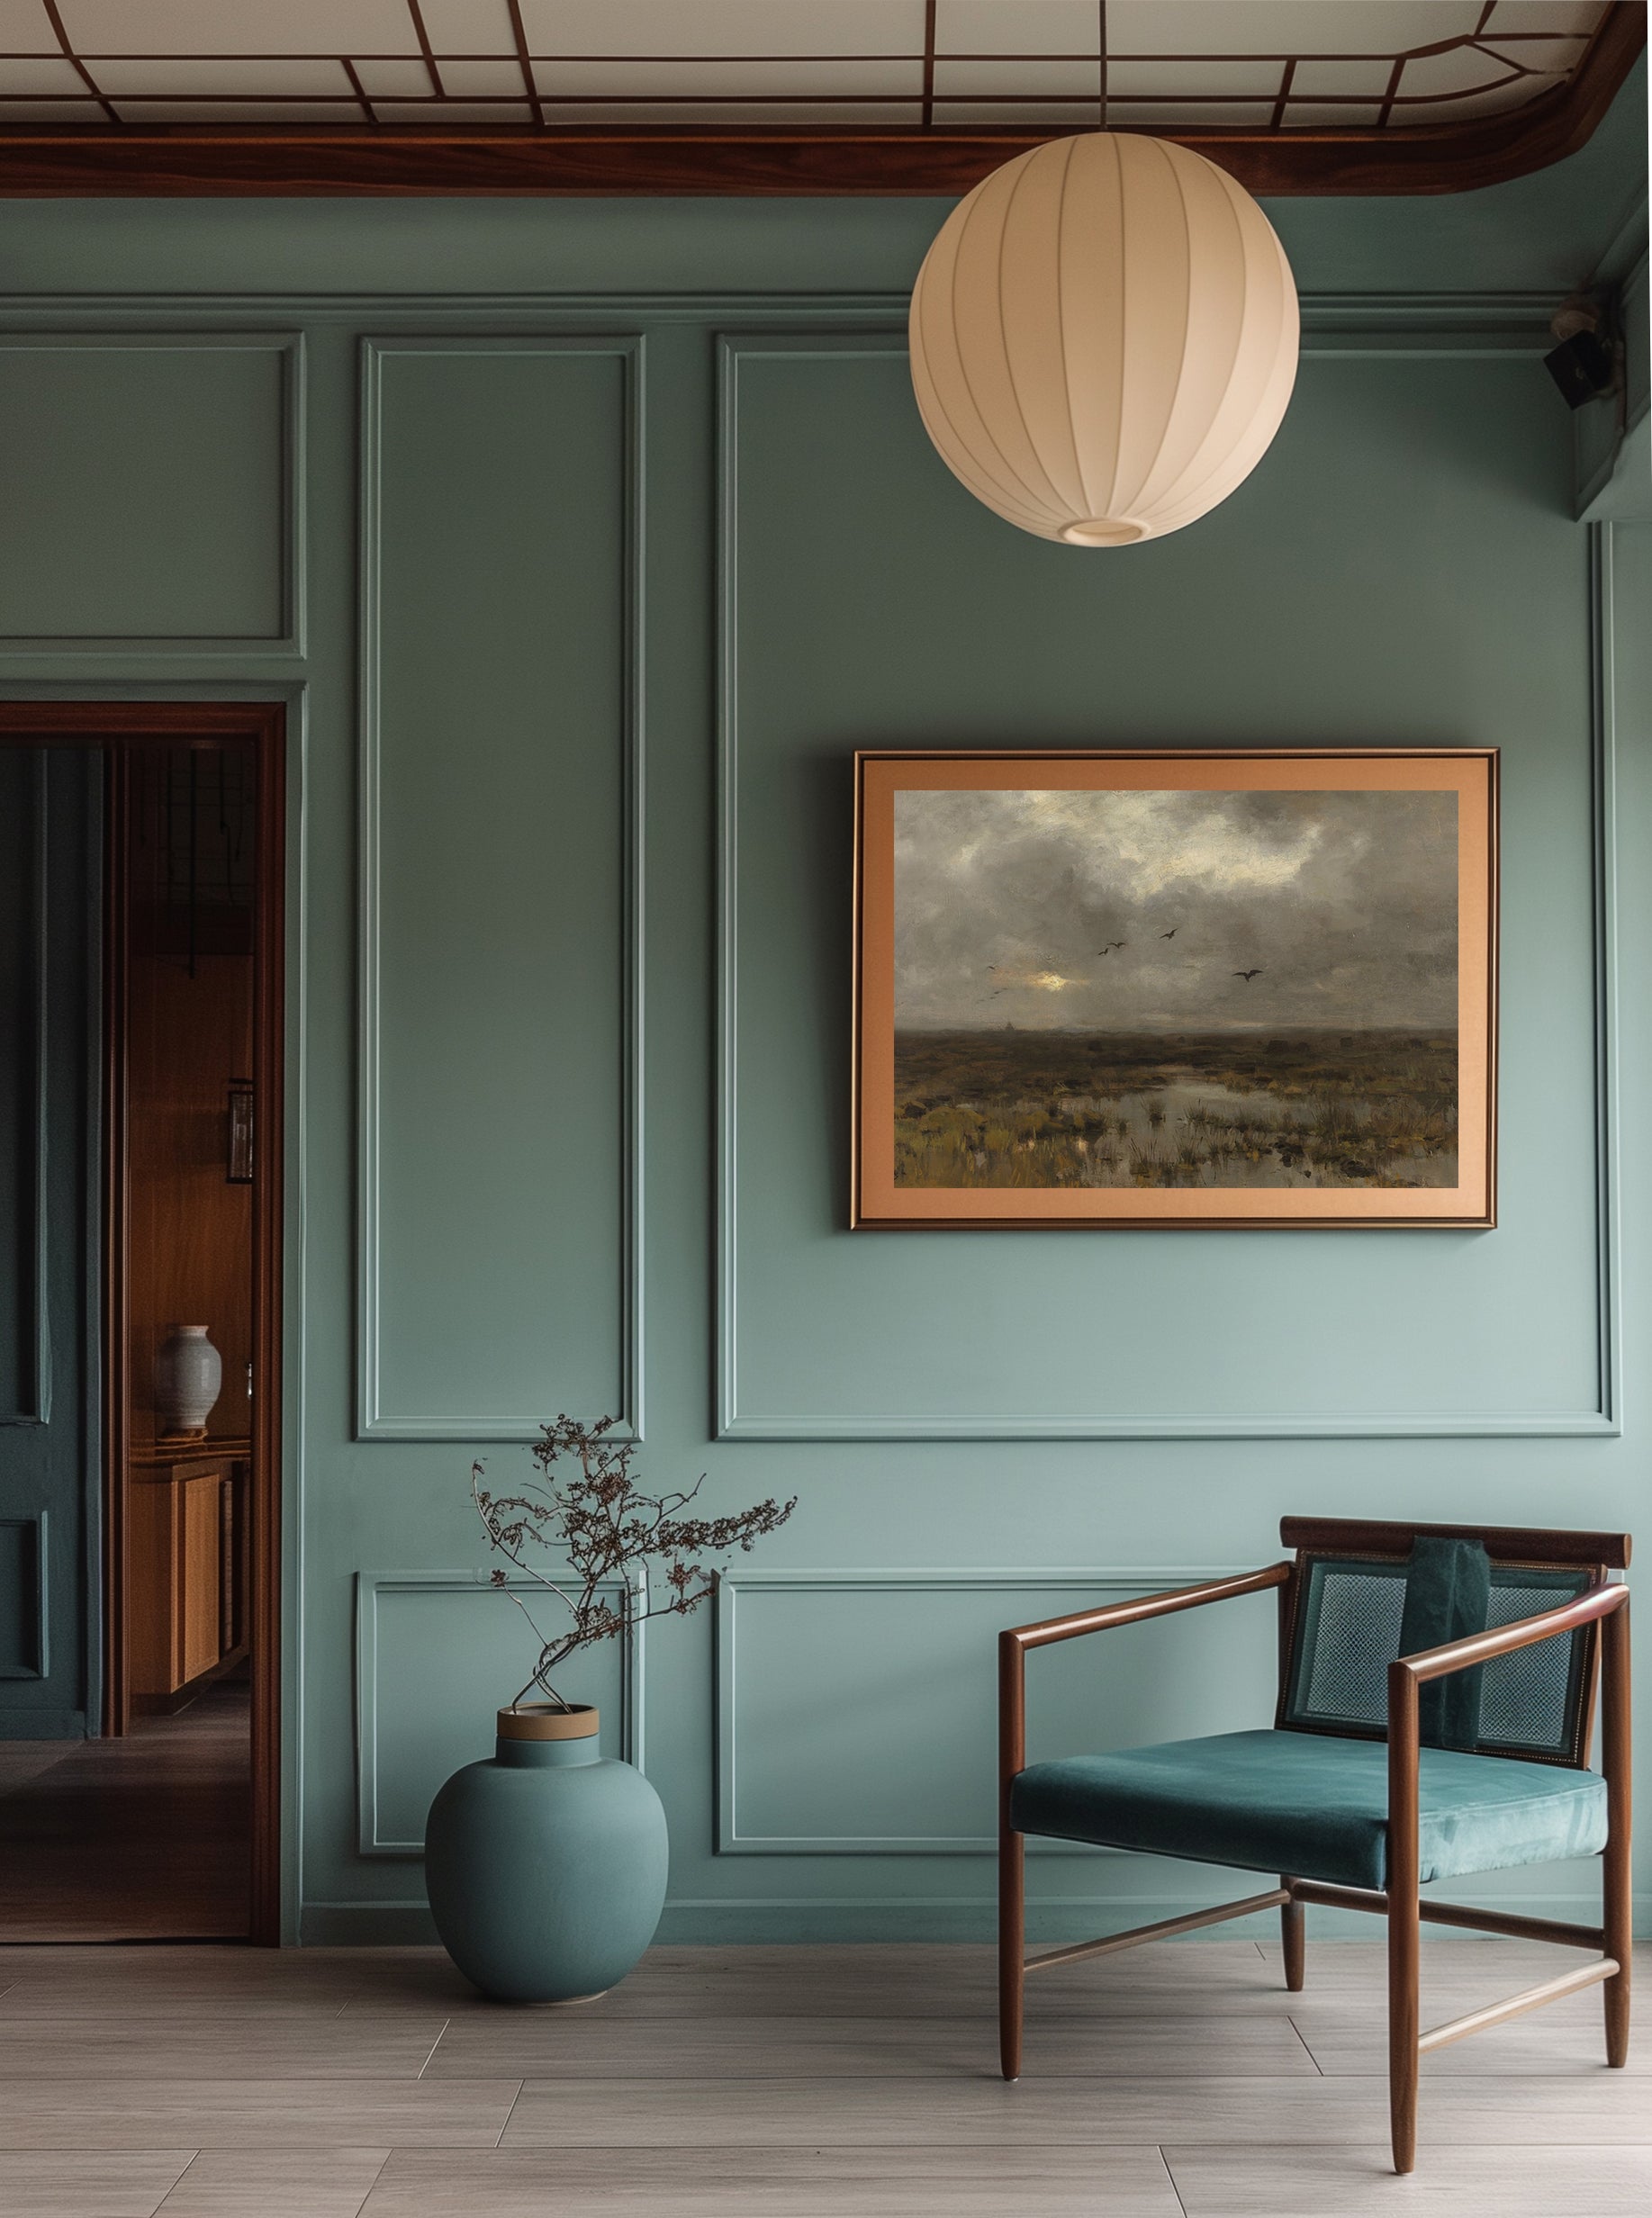 Dark and moody vintage landscape painting in an interior. 